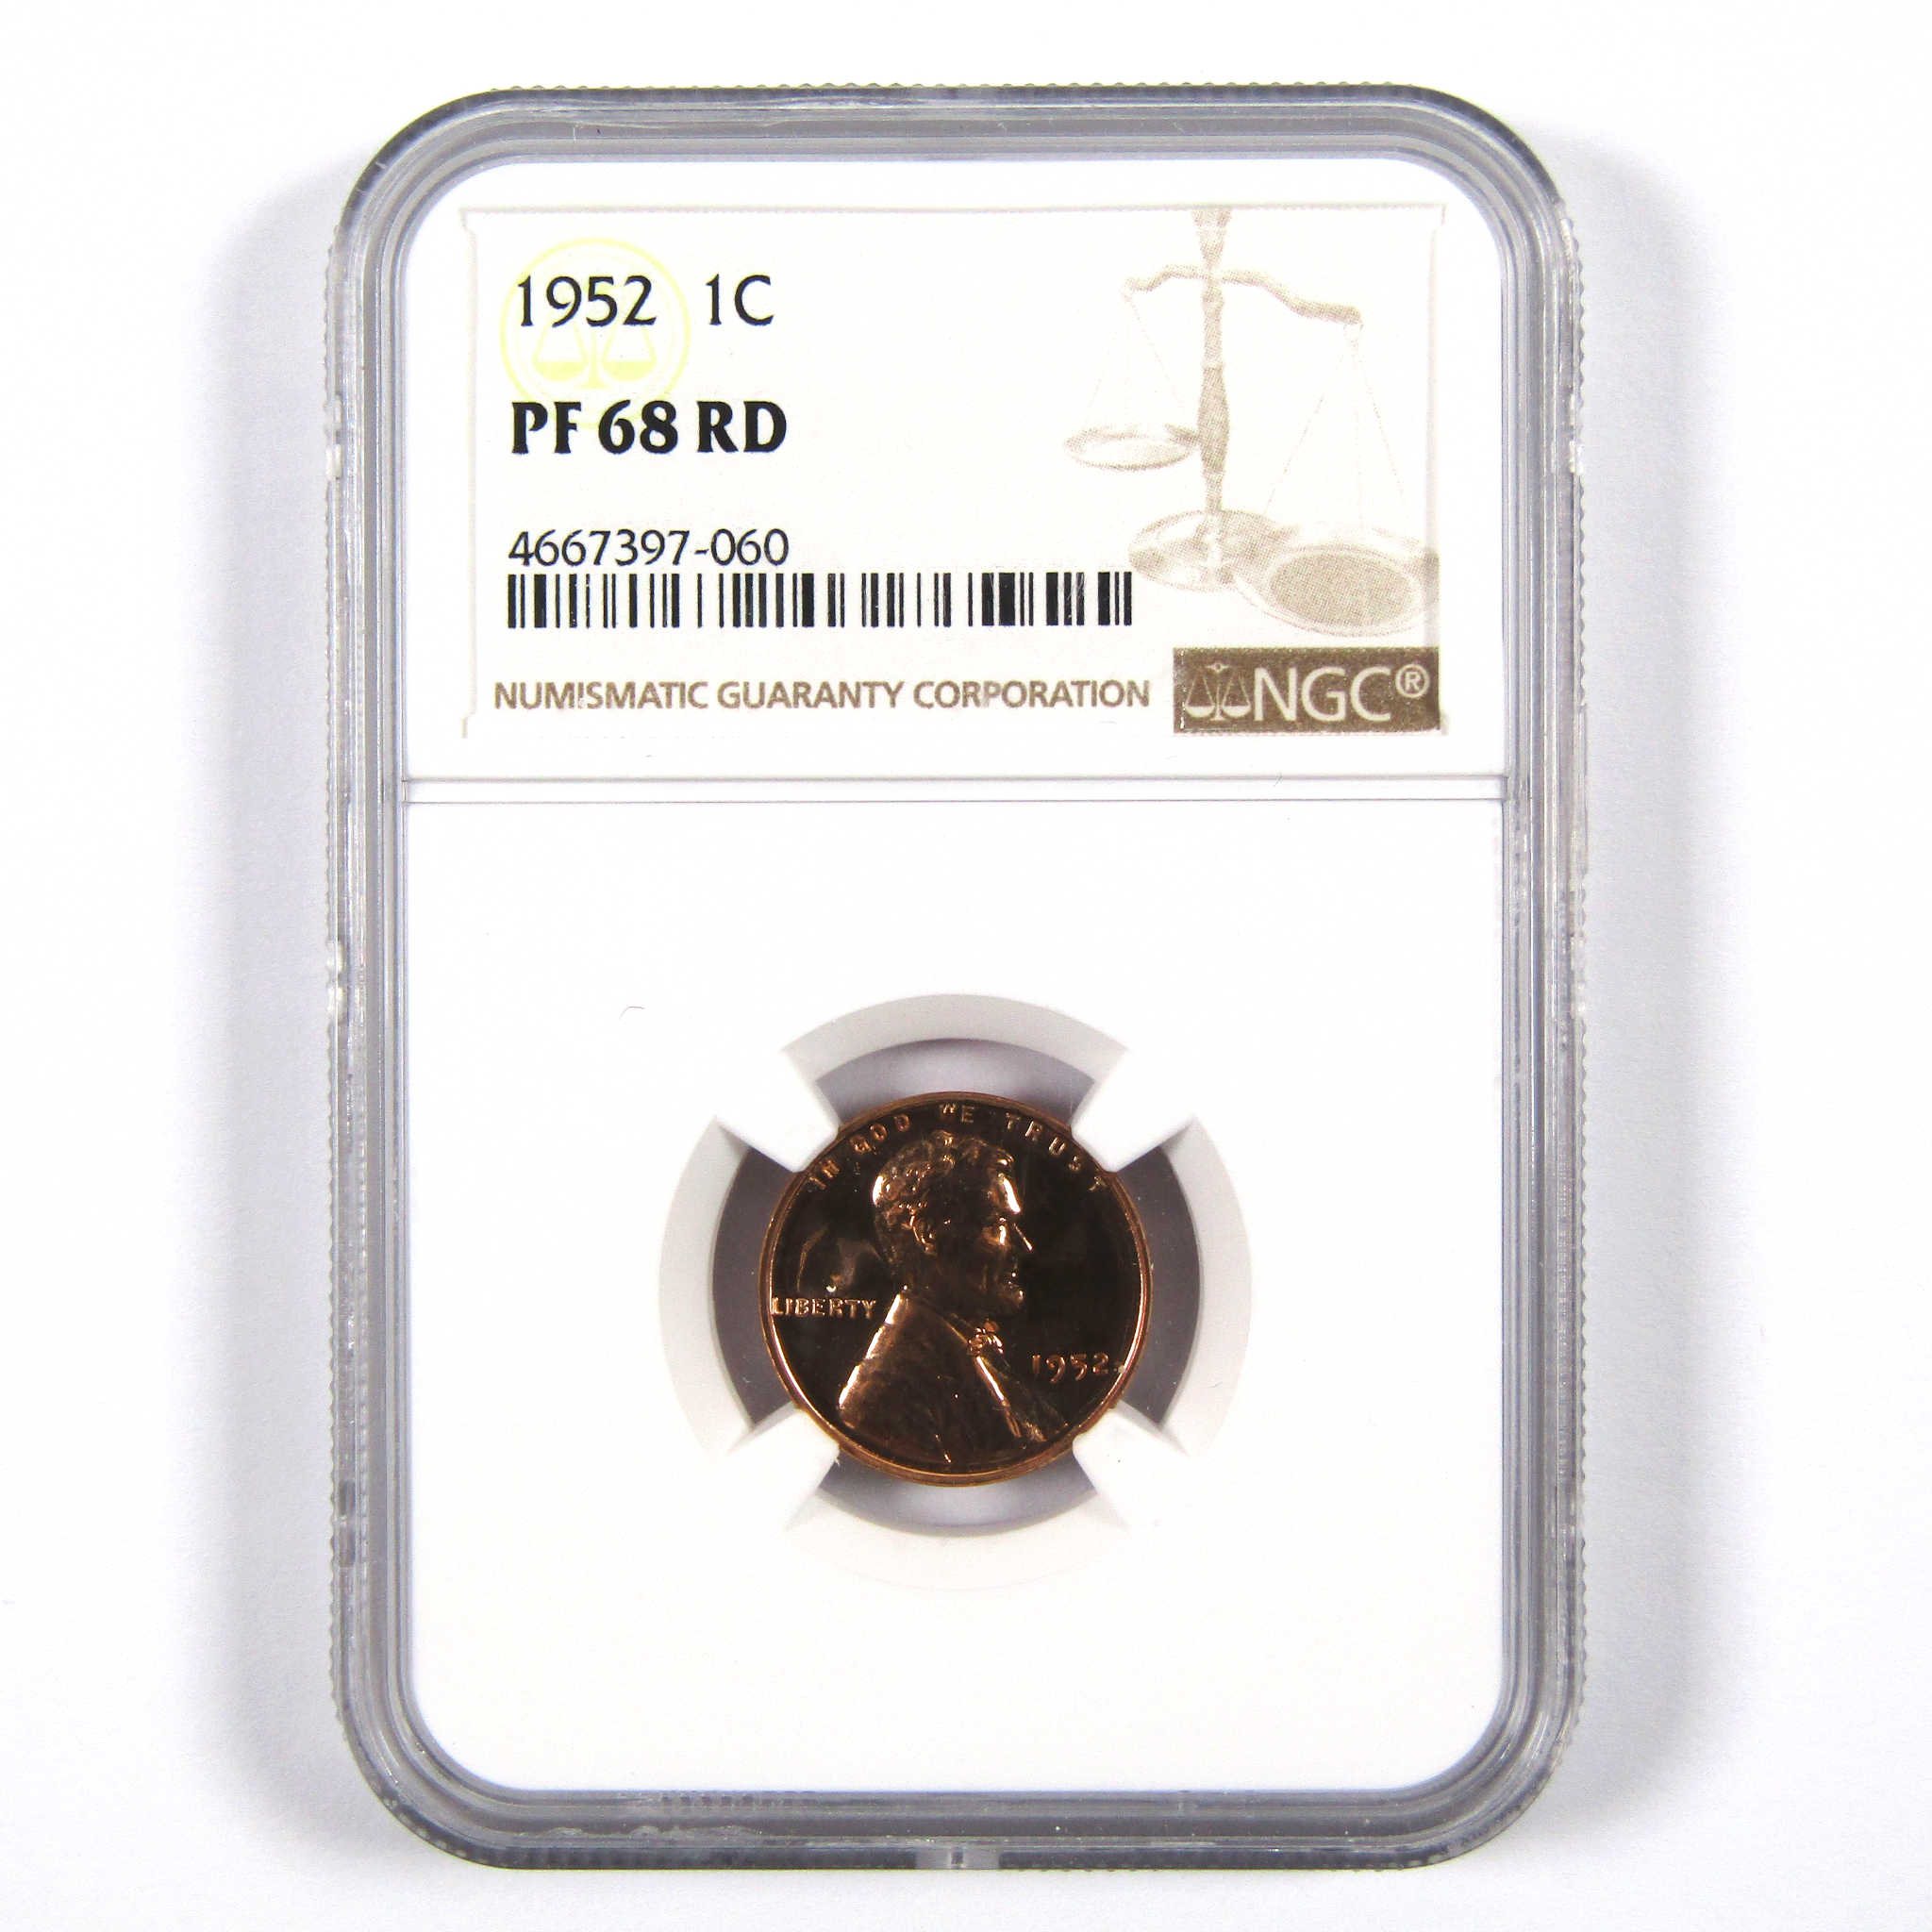 1952 Lincoln Wheat Cent PF 68 RD NGC Penny 1c Proof Coin SKU:I7543